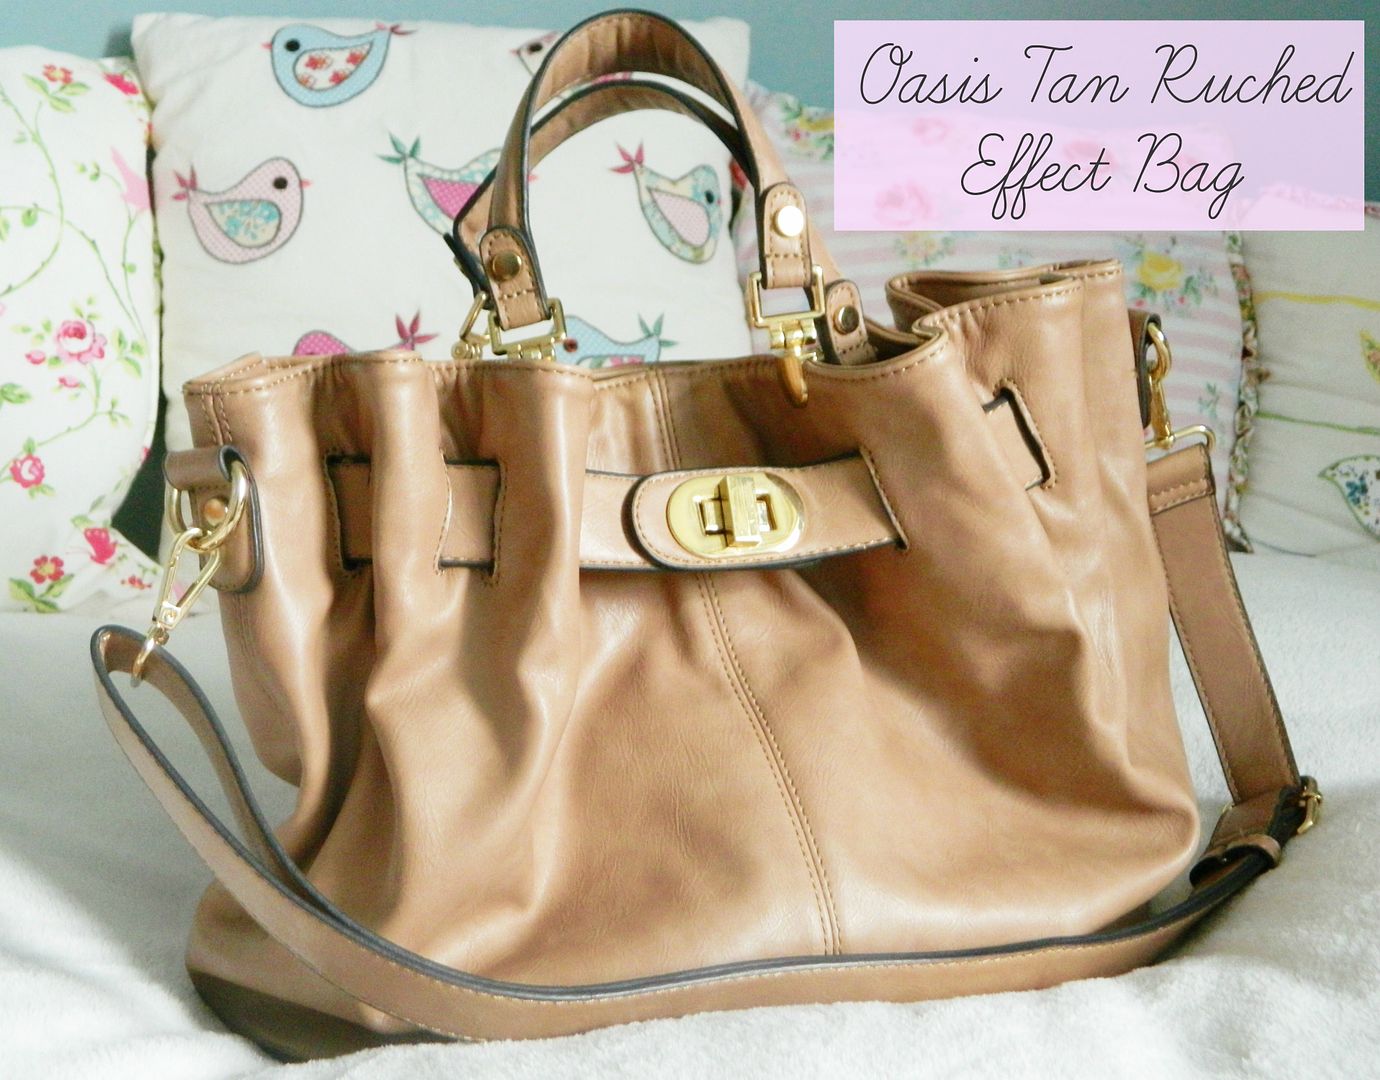 Whats In My Bag Spring 2014 Oasis Tan Ruched Effect Bag Belle-amie UK Beauty Fashion Lifestyle Blog